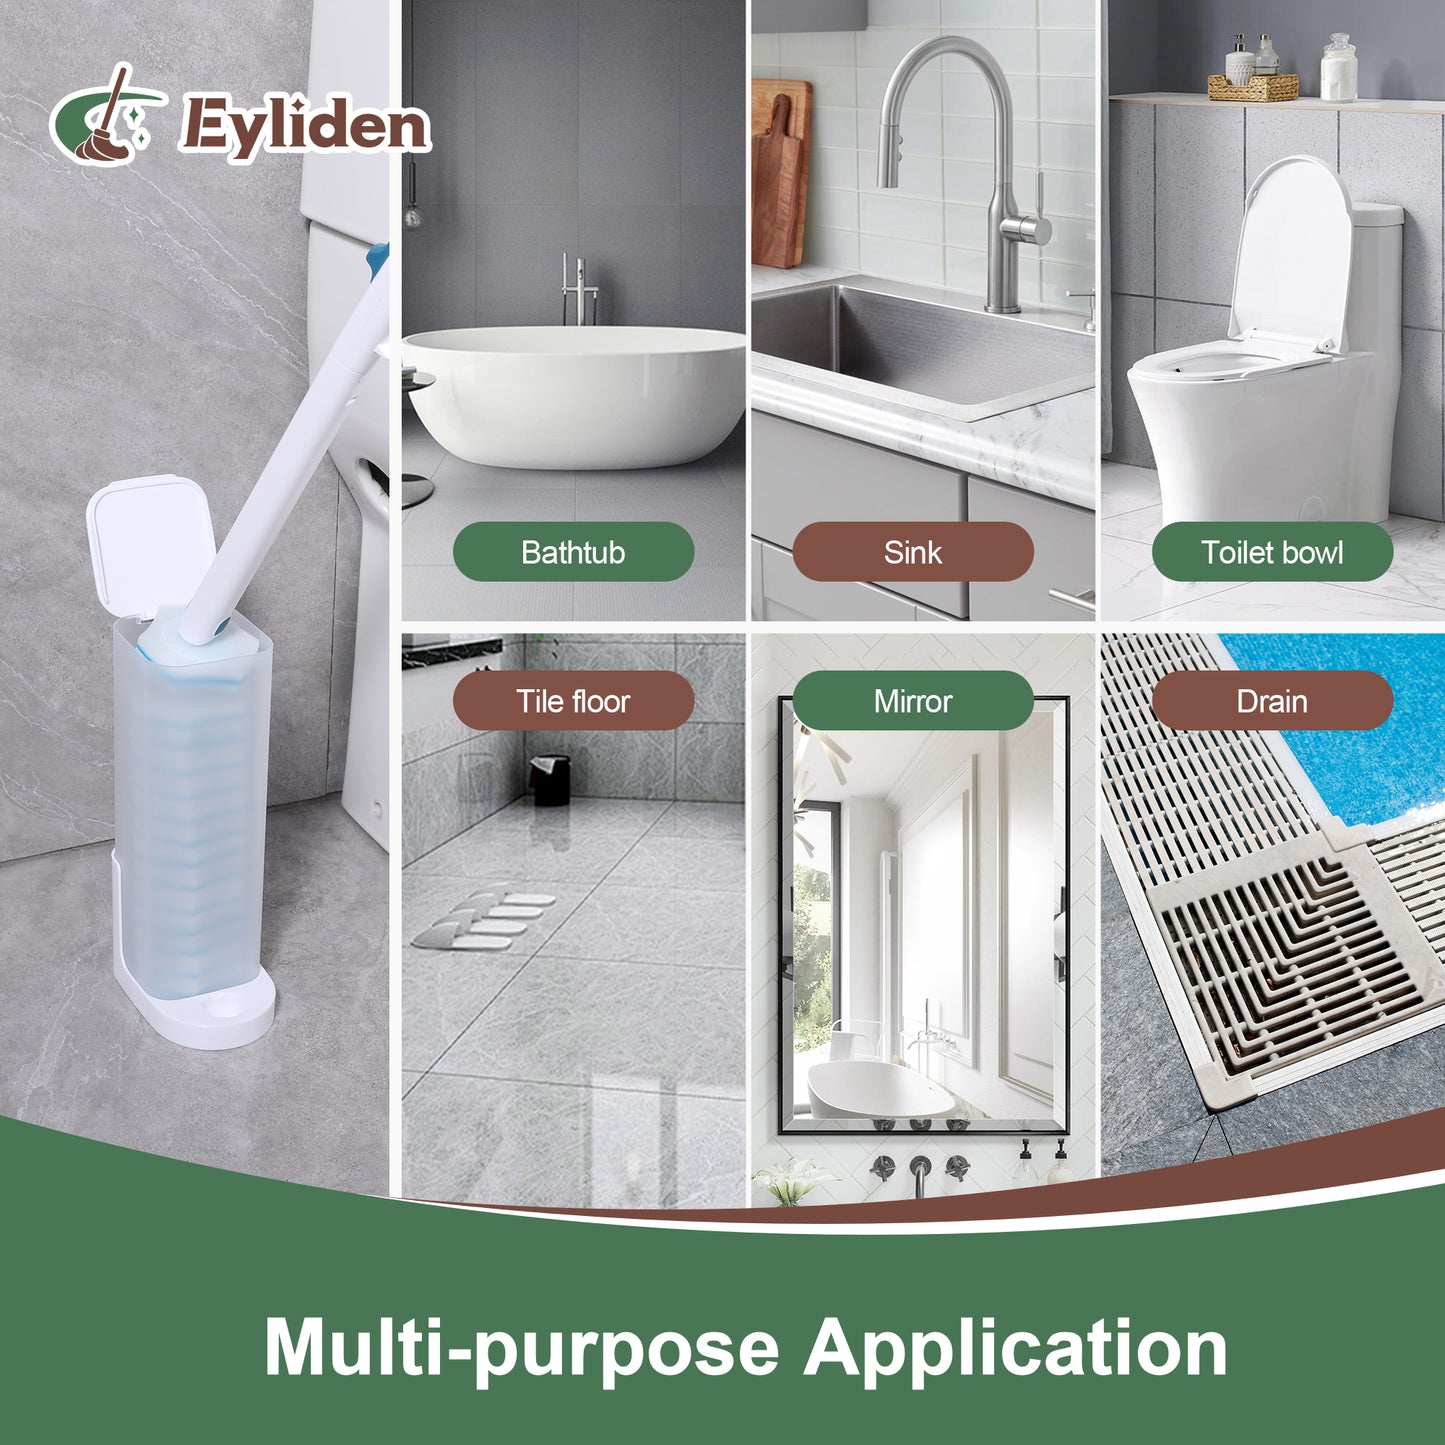 Eyliden Disposable Toilet Bowl Brush and Holder Wall Mounted 1 Storage Caddy kit 15 Refills for Sink, Bathroom Cleaning